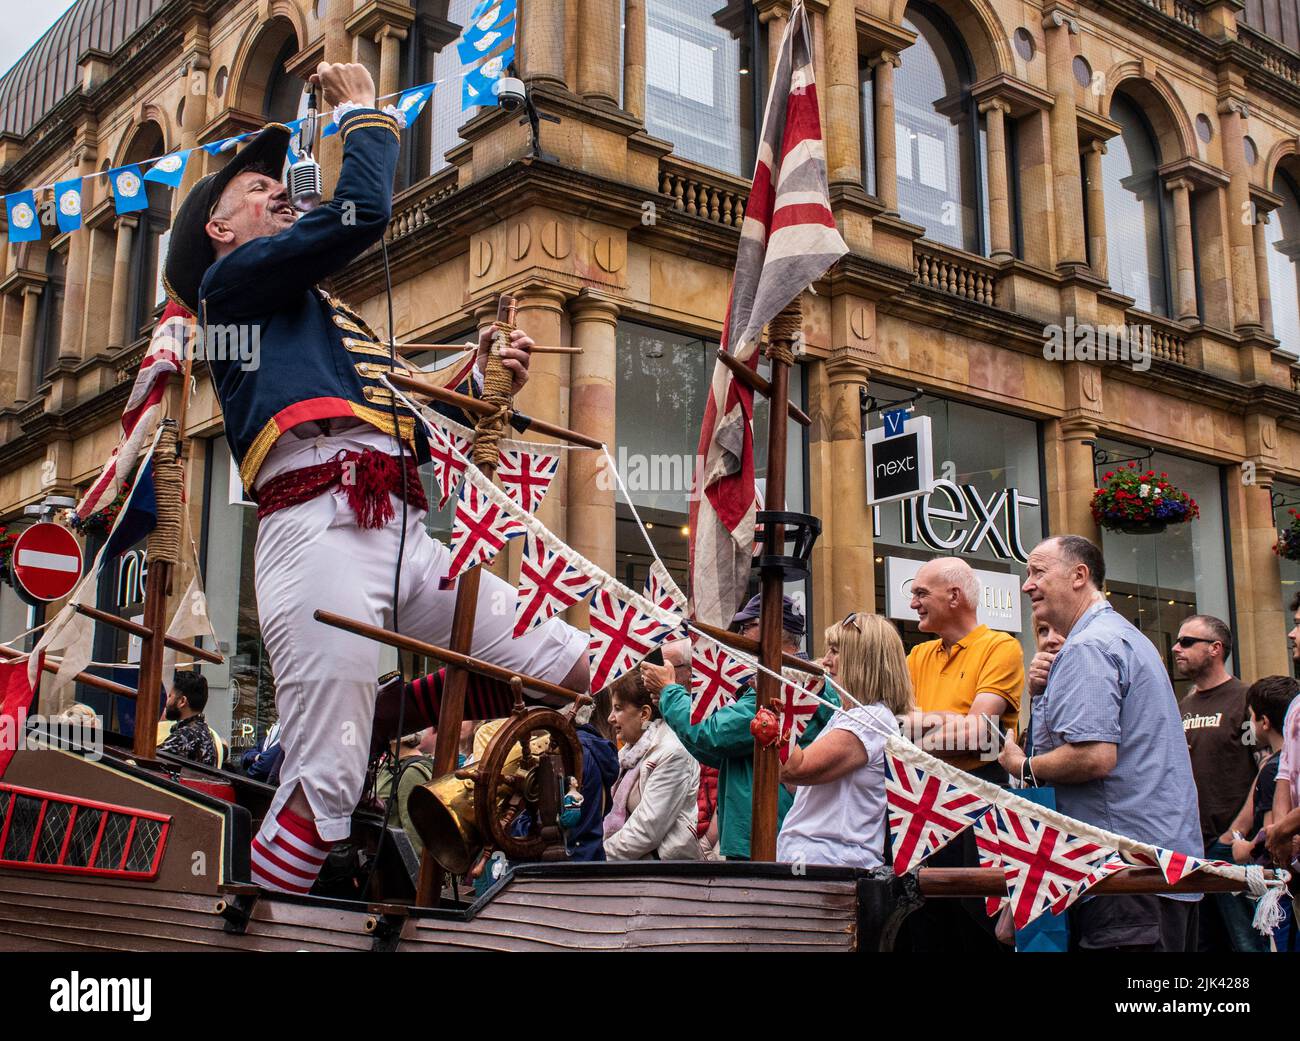 Harrogate, 30th July 2022. The Harrogate Carnival is taking place today under gloomy skies. Captain Poopdeck Porter performing on board HMS Punafore. Picture Credit: ernesto rogata/Alamy Live News Stock Photo